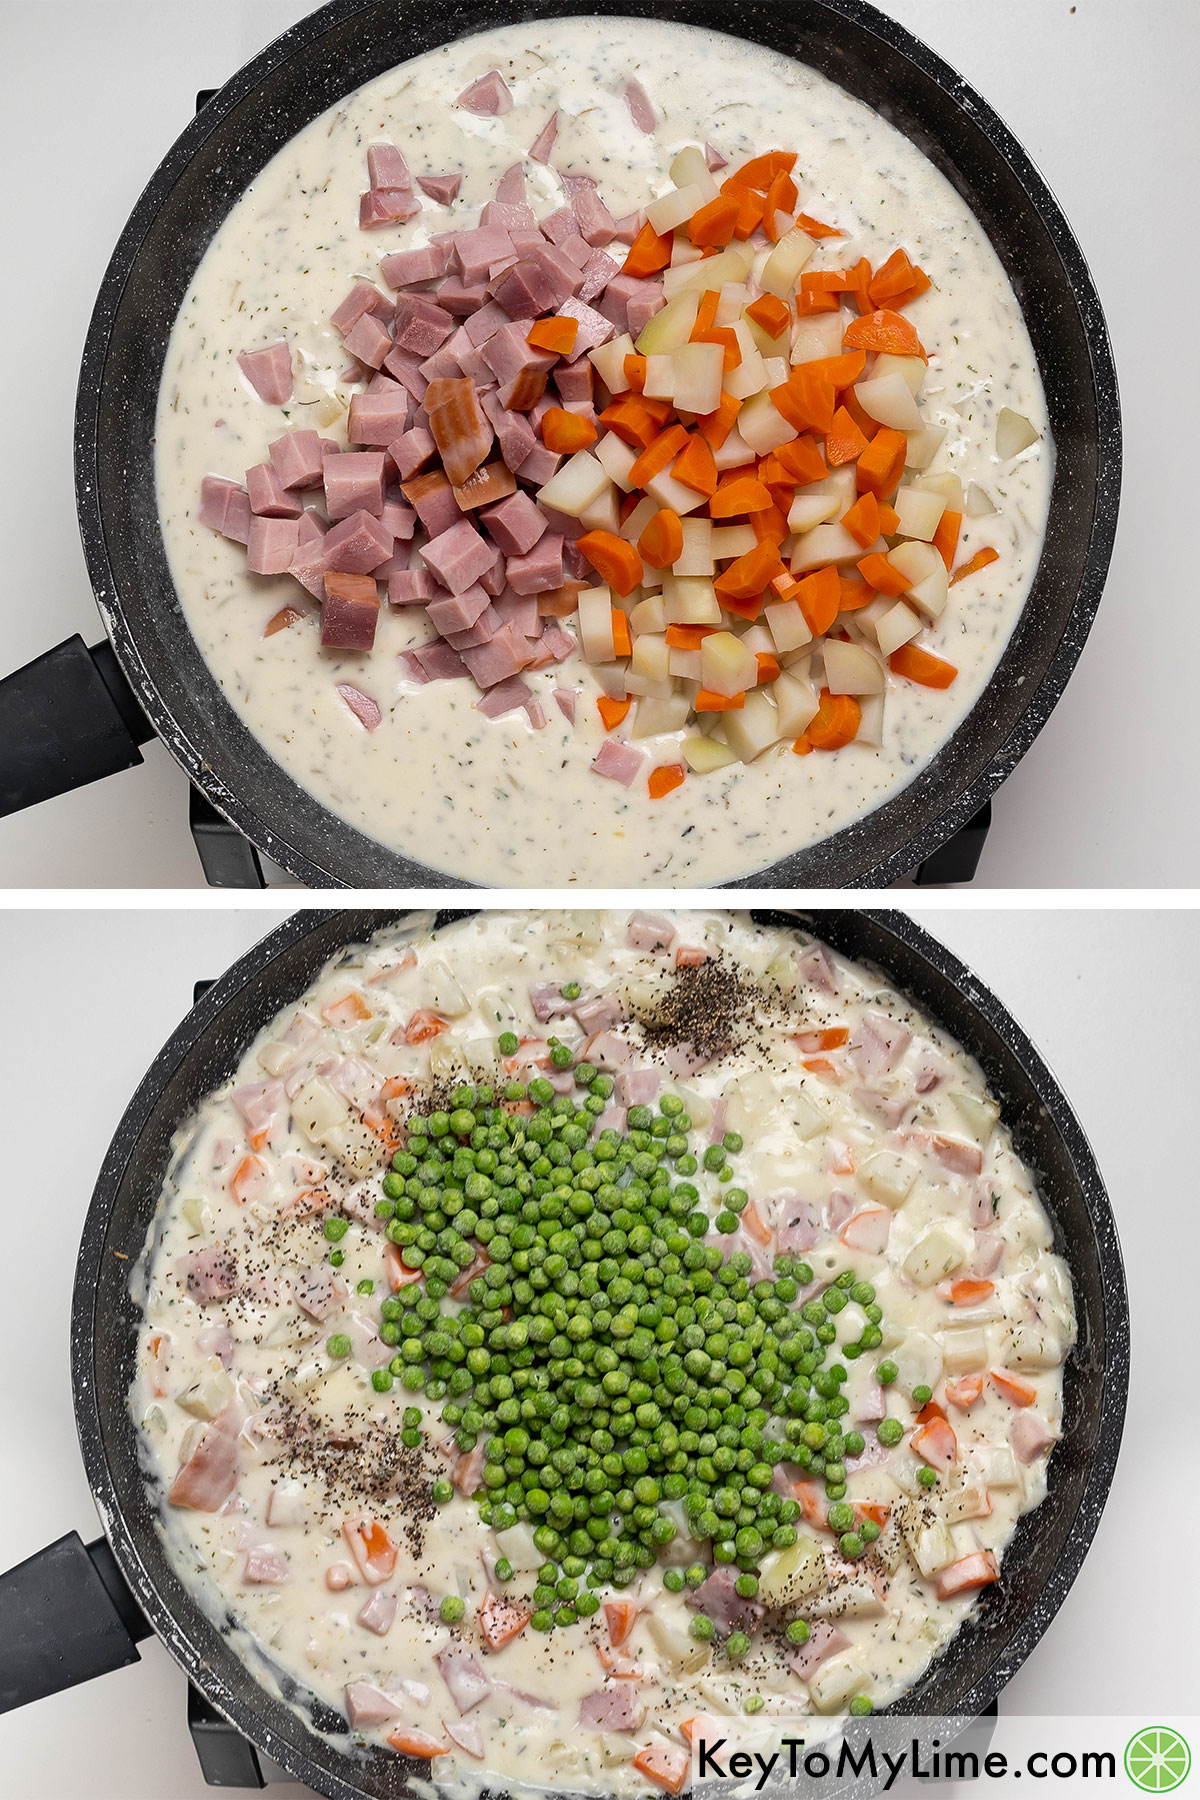 Mixing the boiled potatoes and carrots then adding frozen peas and peppers in a large skillet.